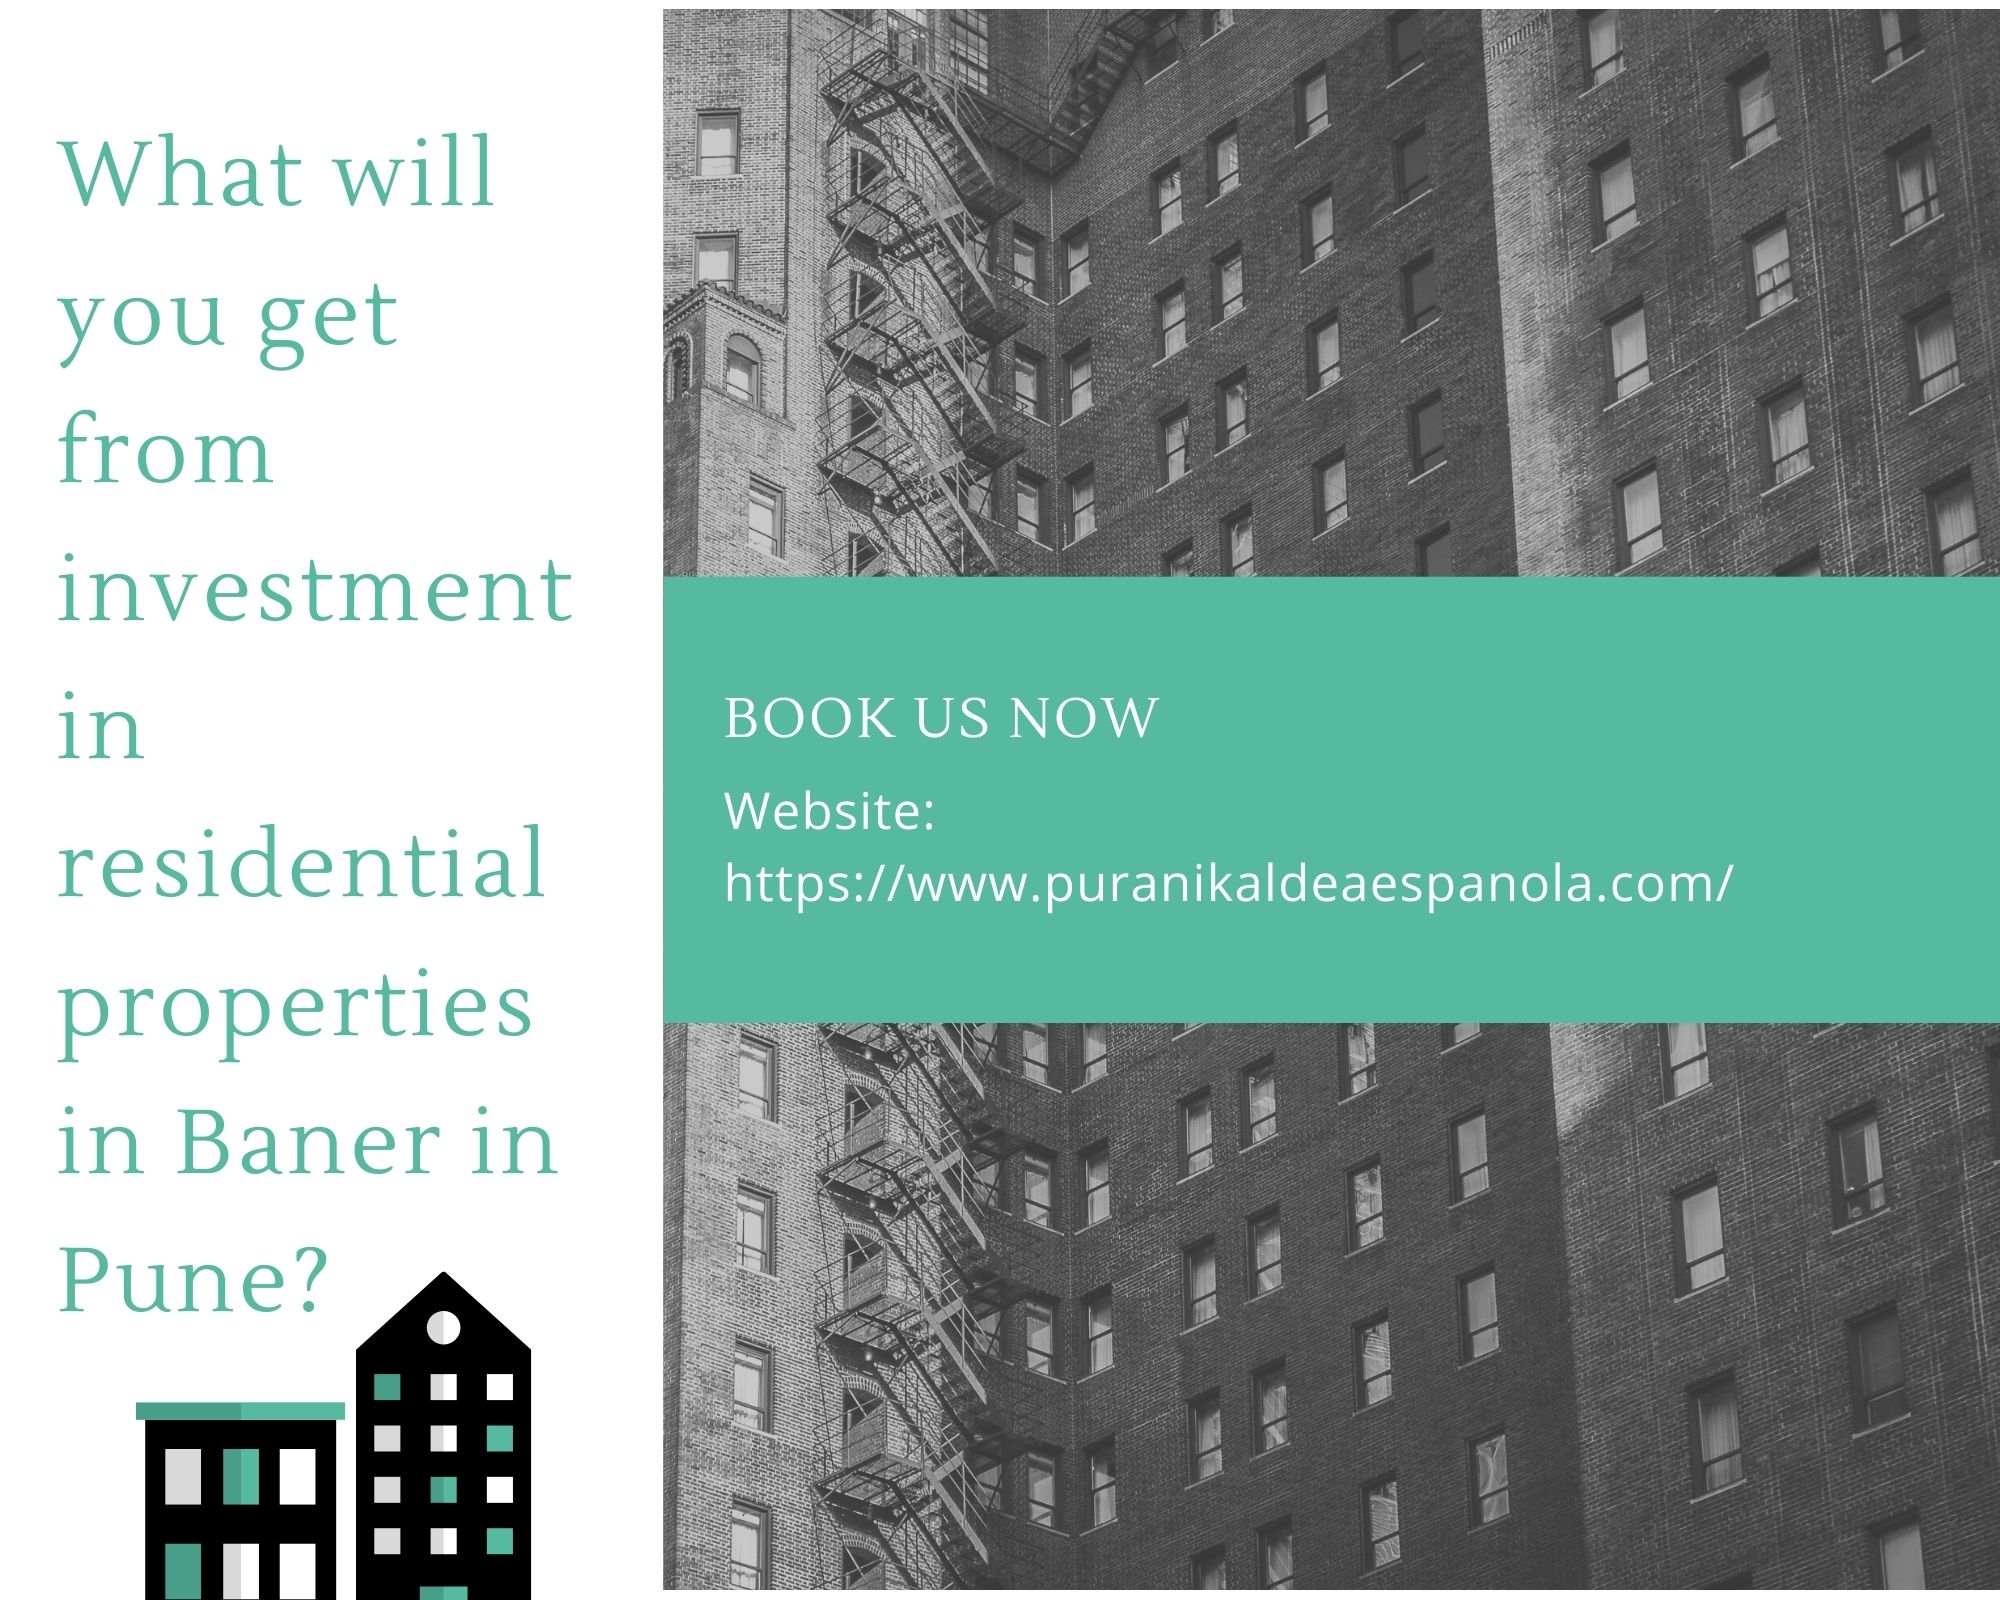 What will you get from investment in residential properties in Baner in Pune?